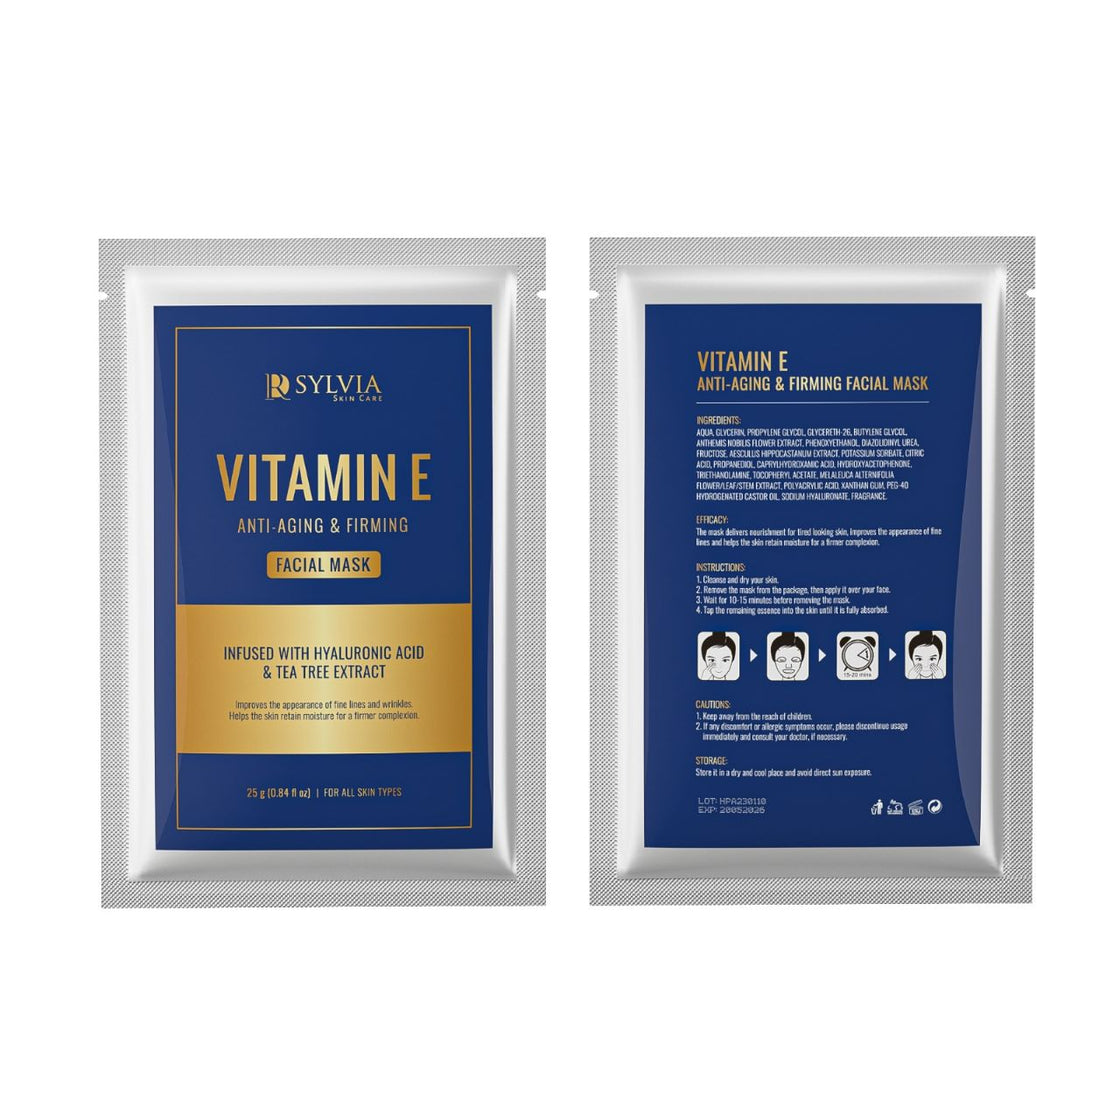 VITAMIN E ANTI-AGING AND FIRMING FACIAL MASK